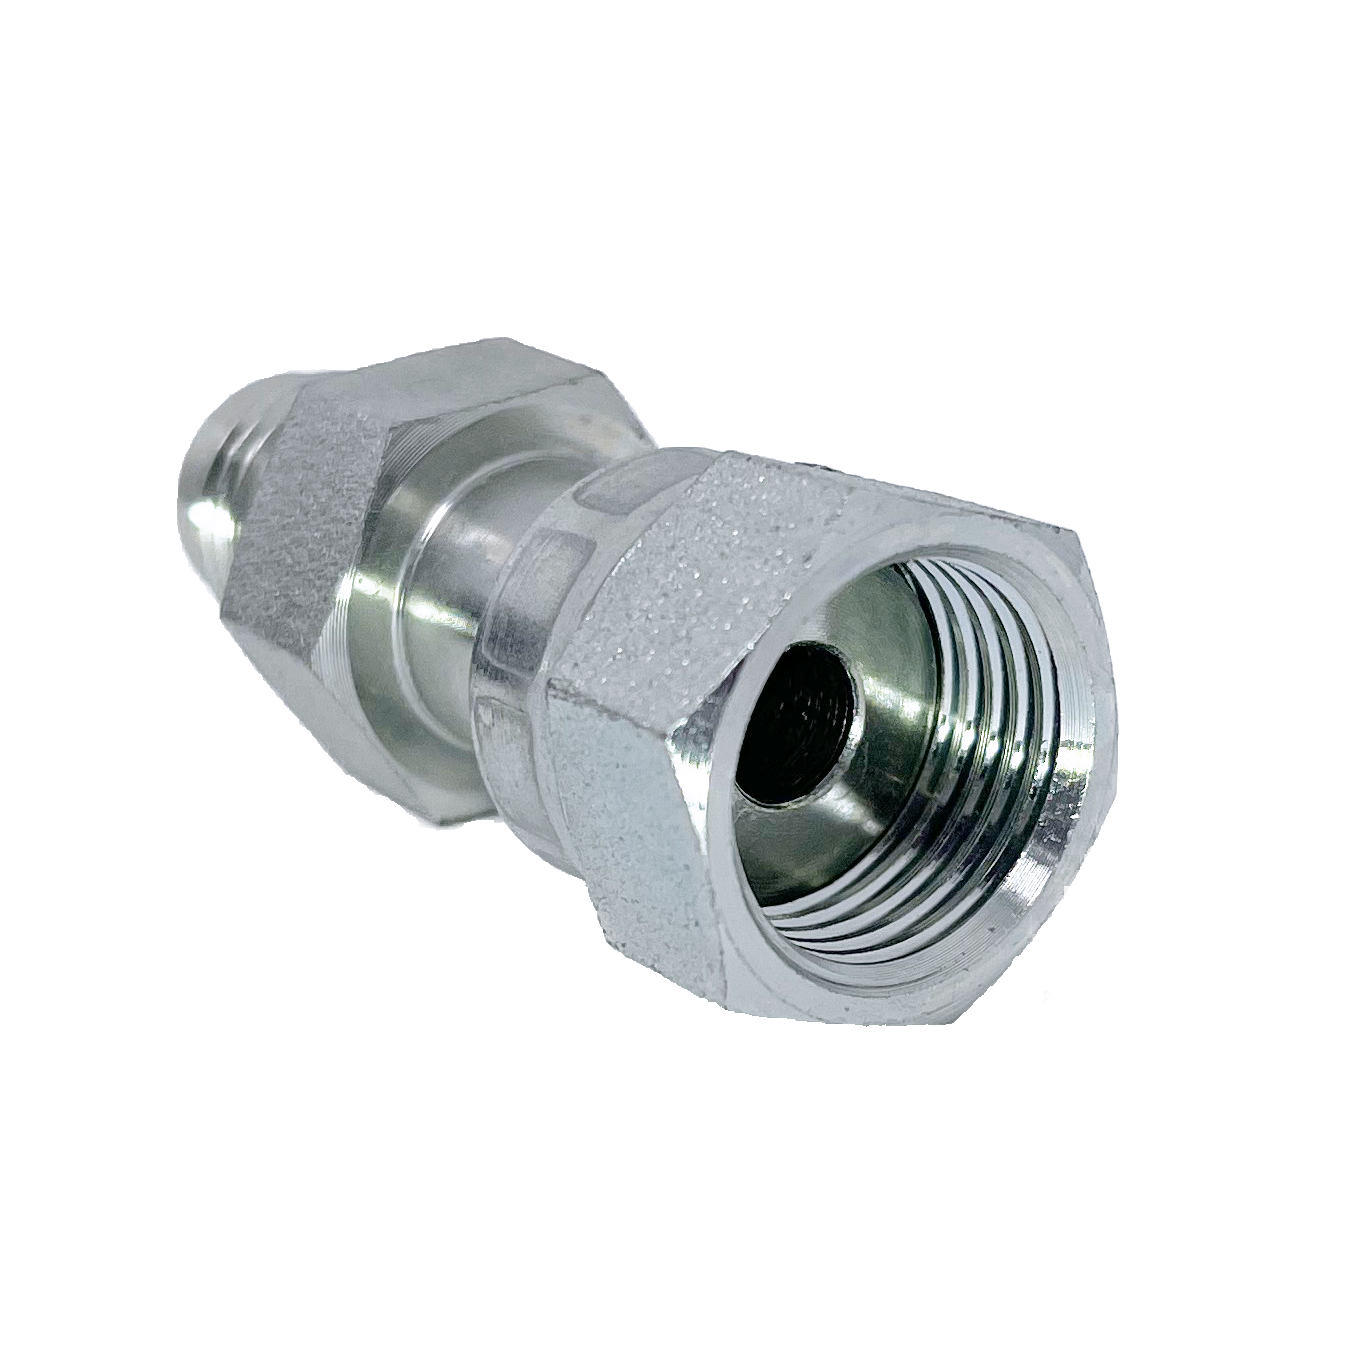 6620-24-24 : Adaptall Straight Adapter, Male 1.5 (1-1/2") JIC x Female 1.5 (1-1/2") ORFS, Carbon Steel